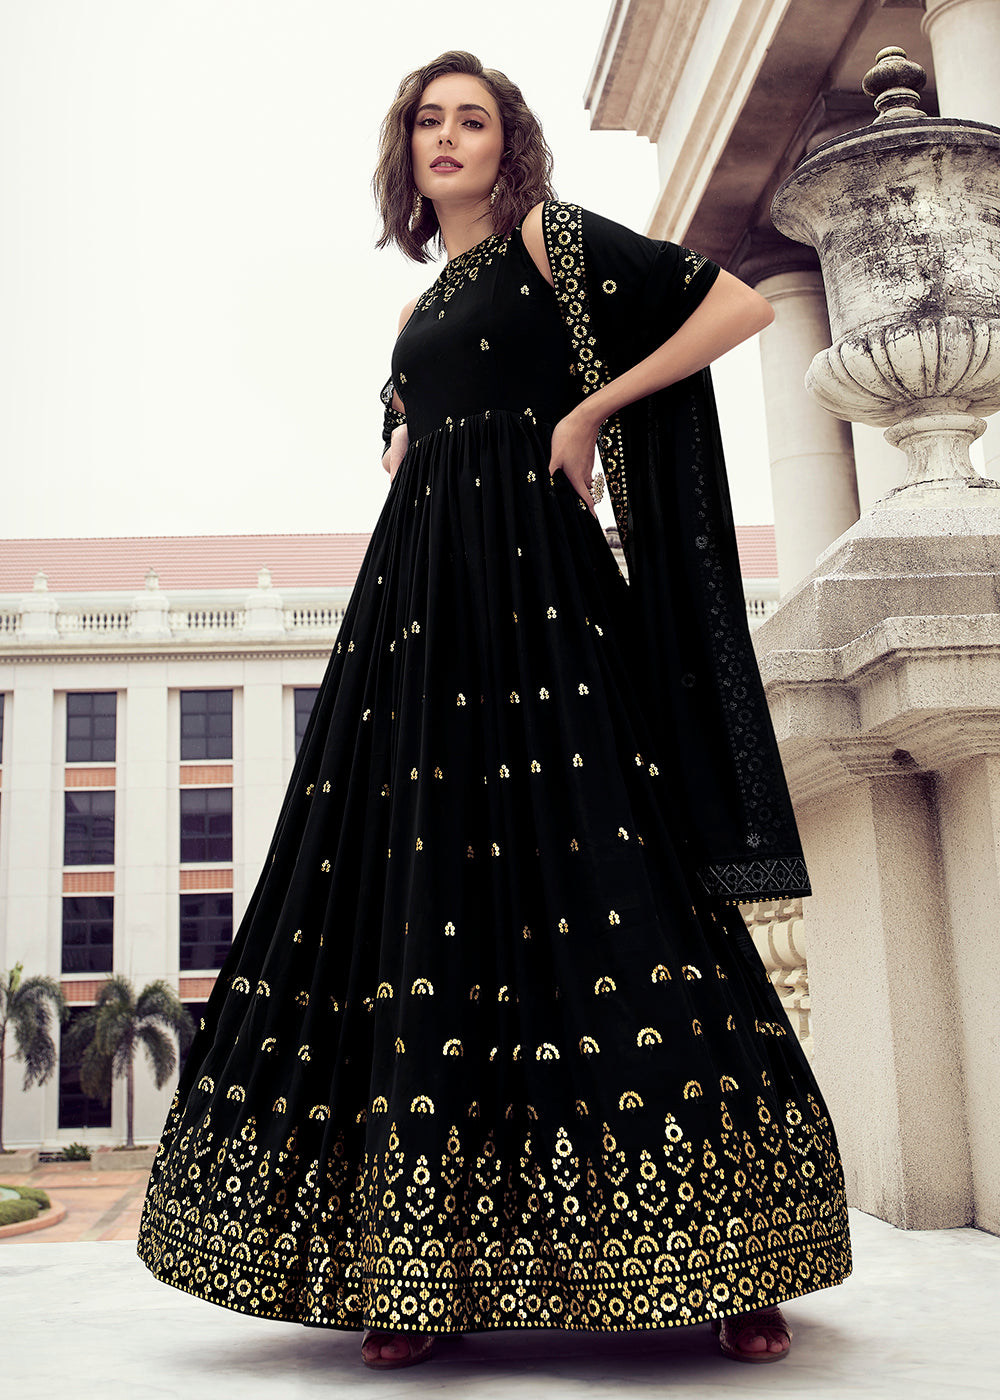 Buy Now Glam Black Georgette Thread & Sequins Wedding Party Gown Online in USA, UK, Australia, New Zealand, Canada & Worldwide at Empress Clothing. 